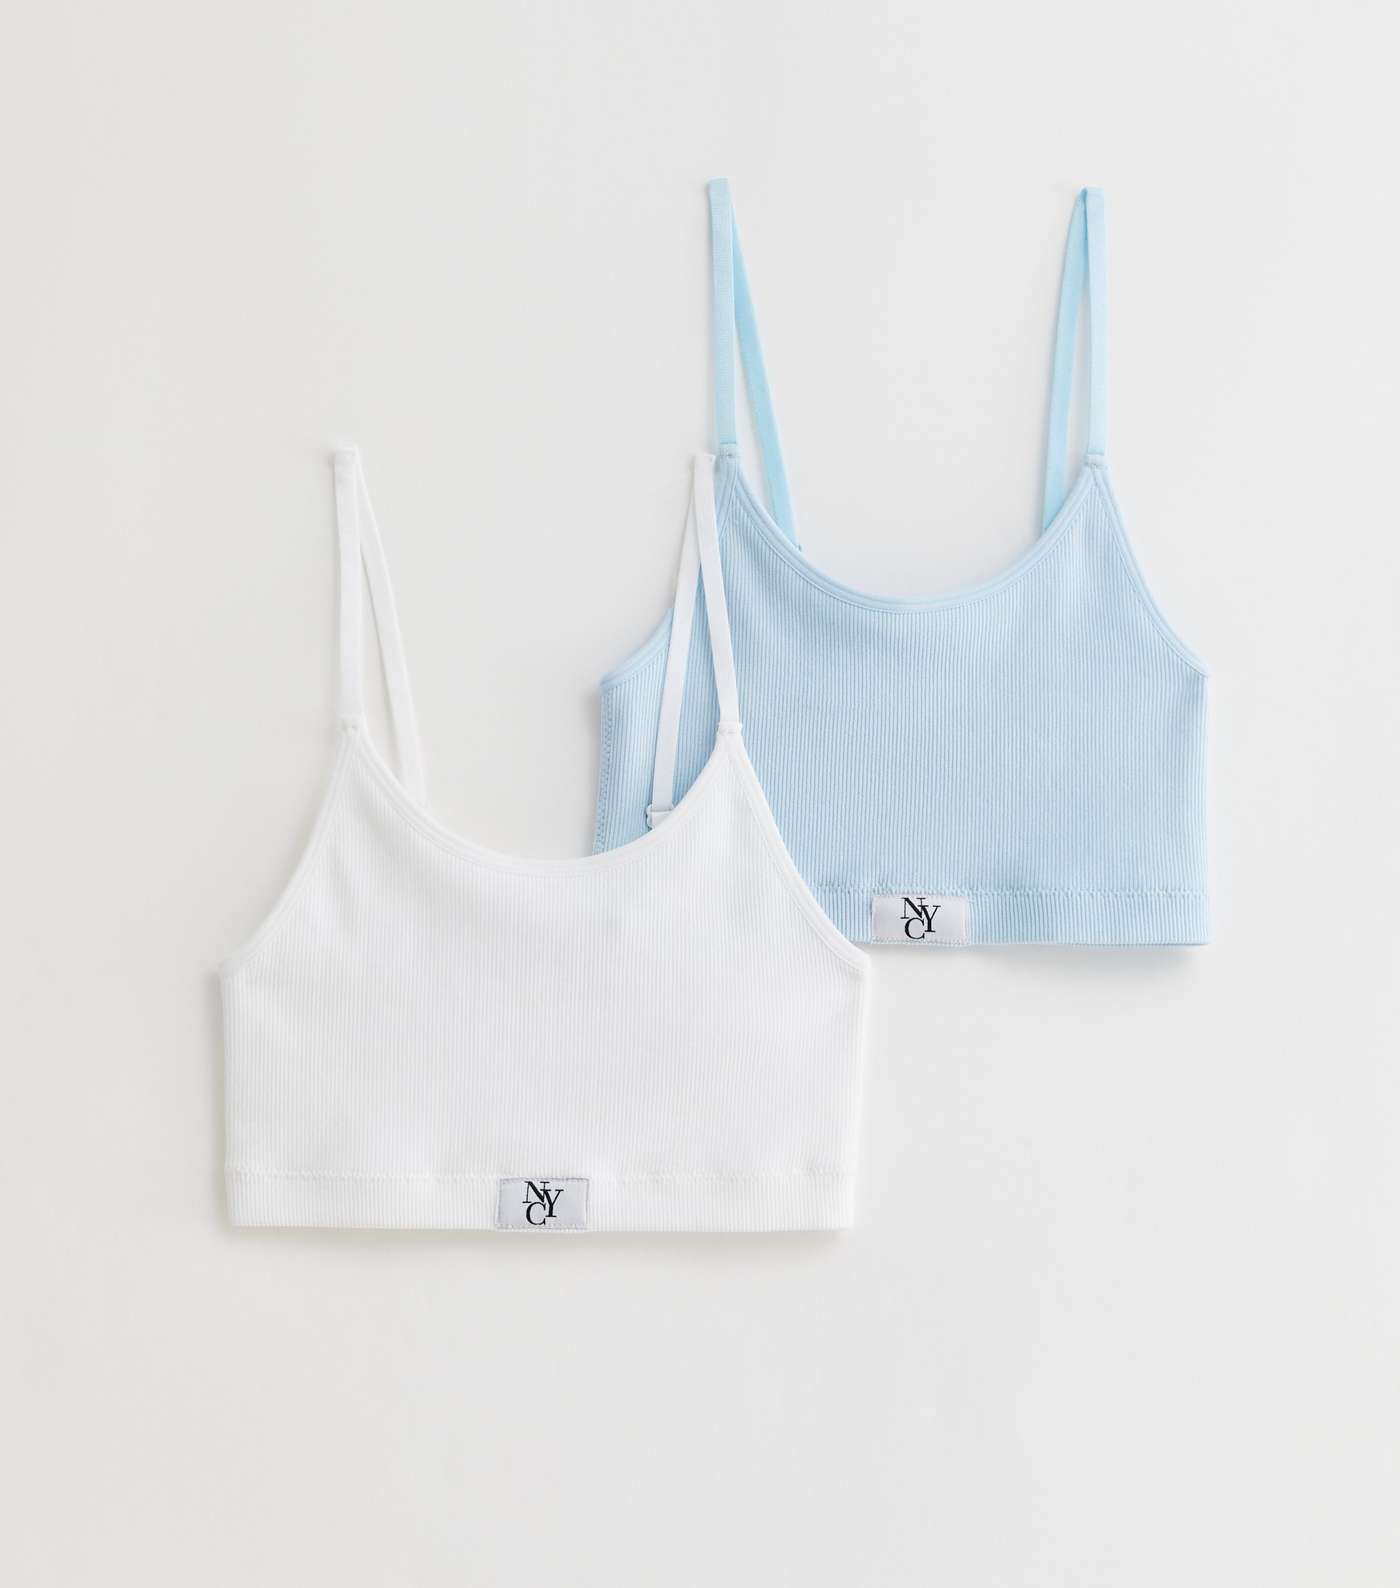 Girls 2 Pack Blue and White Ribbed Seamless Crop Tops